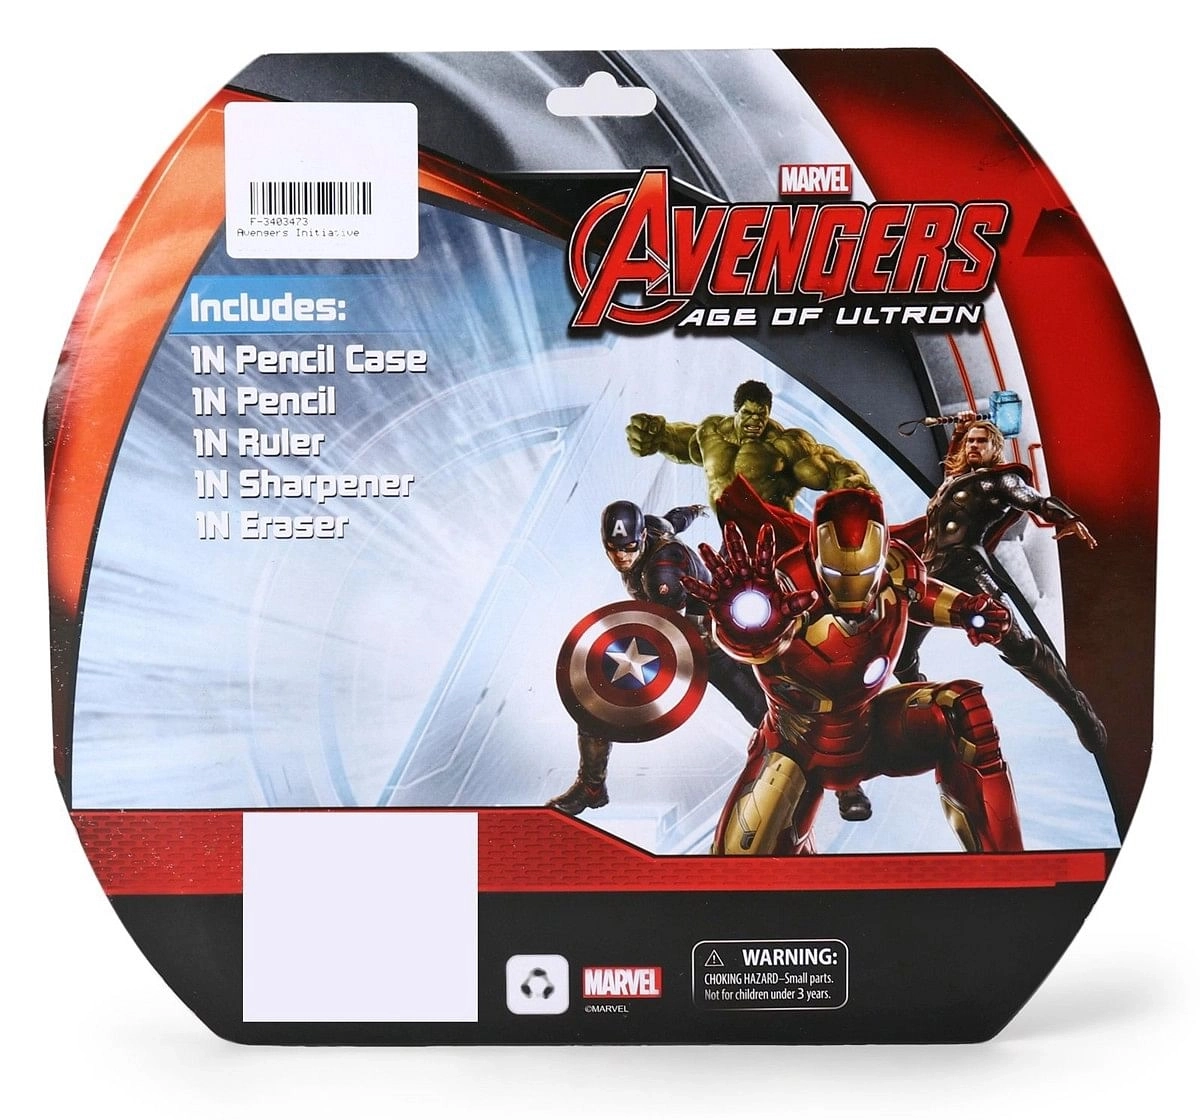 Marvel Avengers Initiative Stationery Set Kit of 5 in 1 Blister Pack Multicolor 3Y+